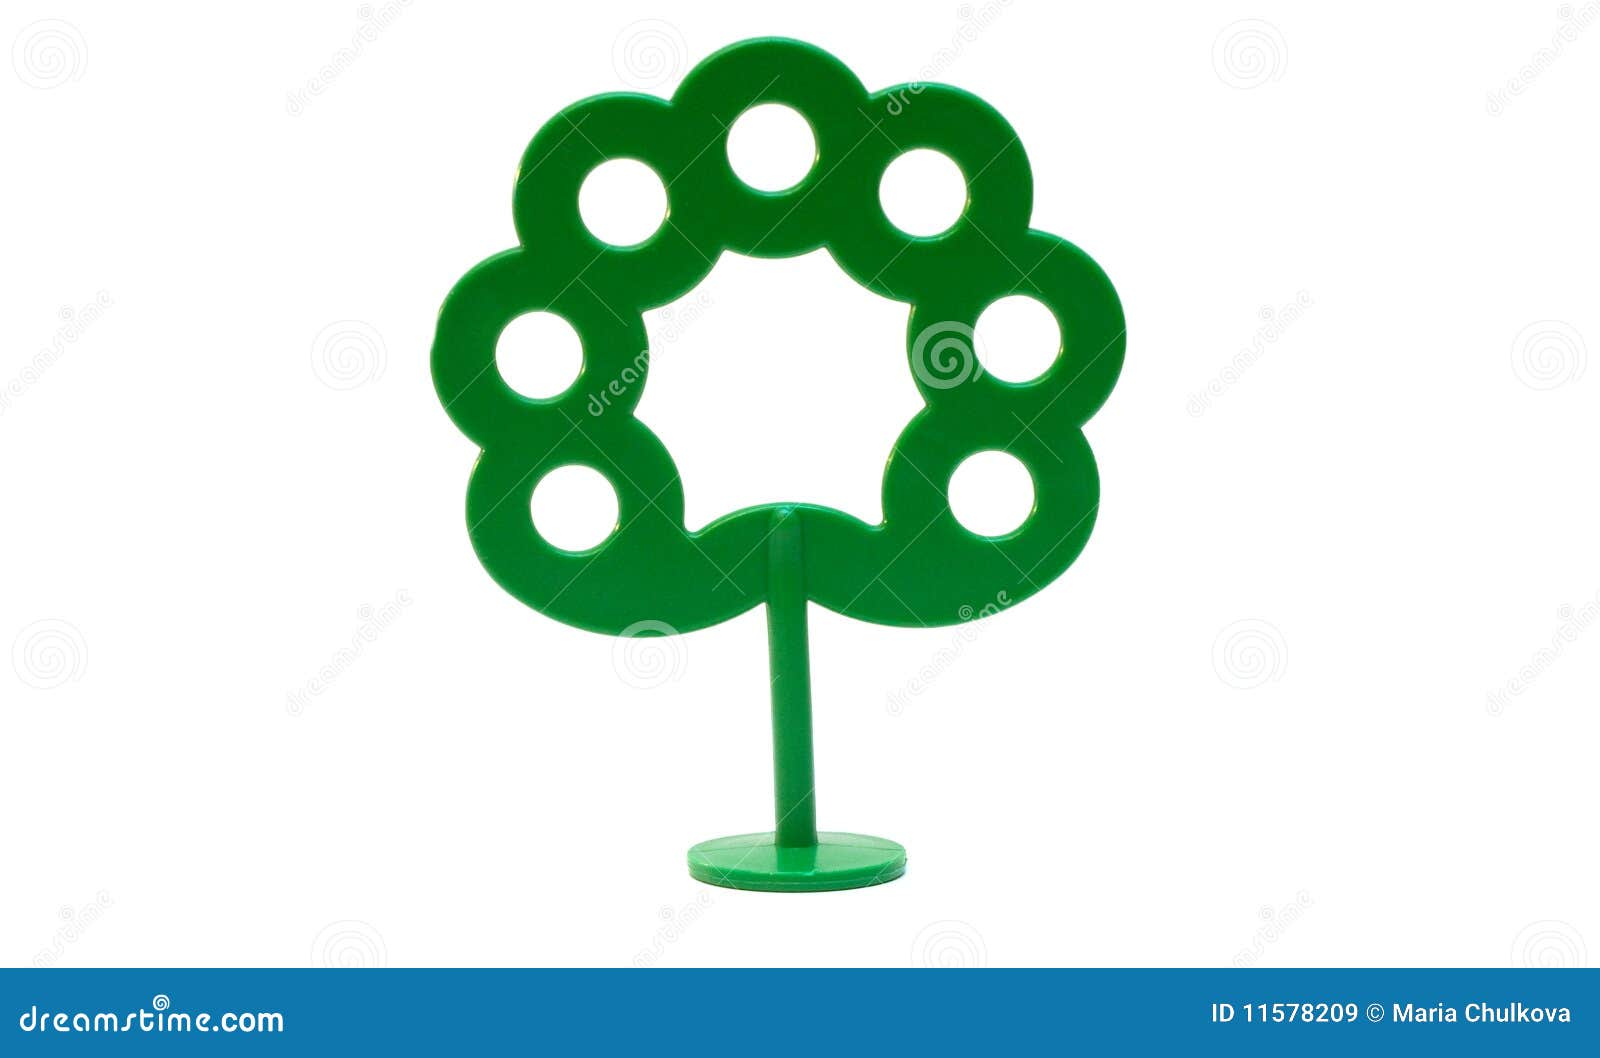 Toy Bright Plastic Green Tree Stock Image Image of game